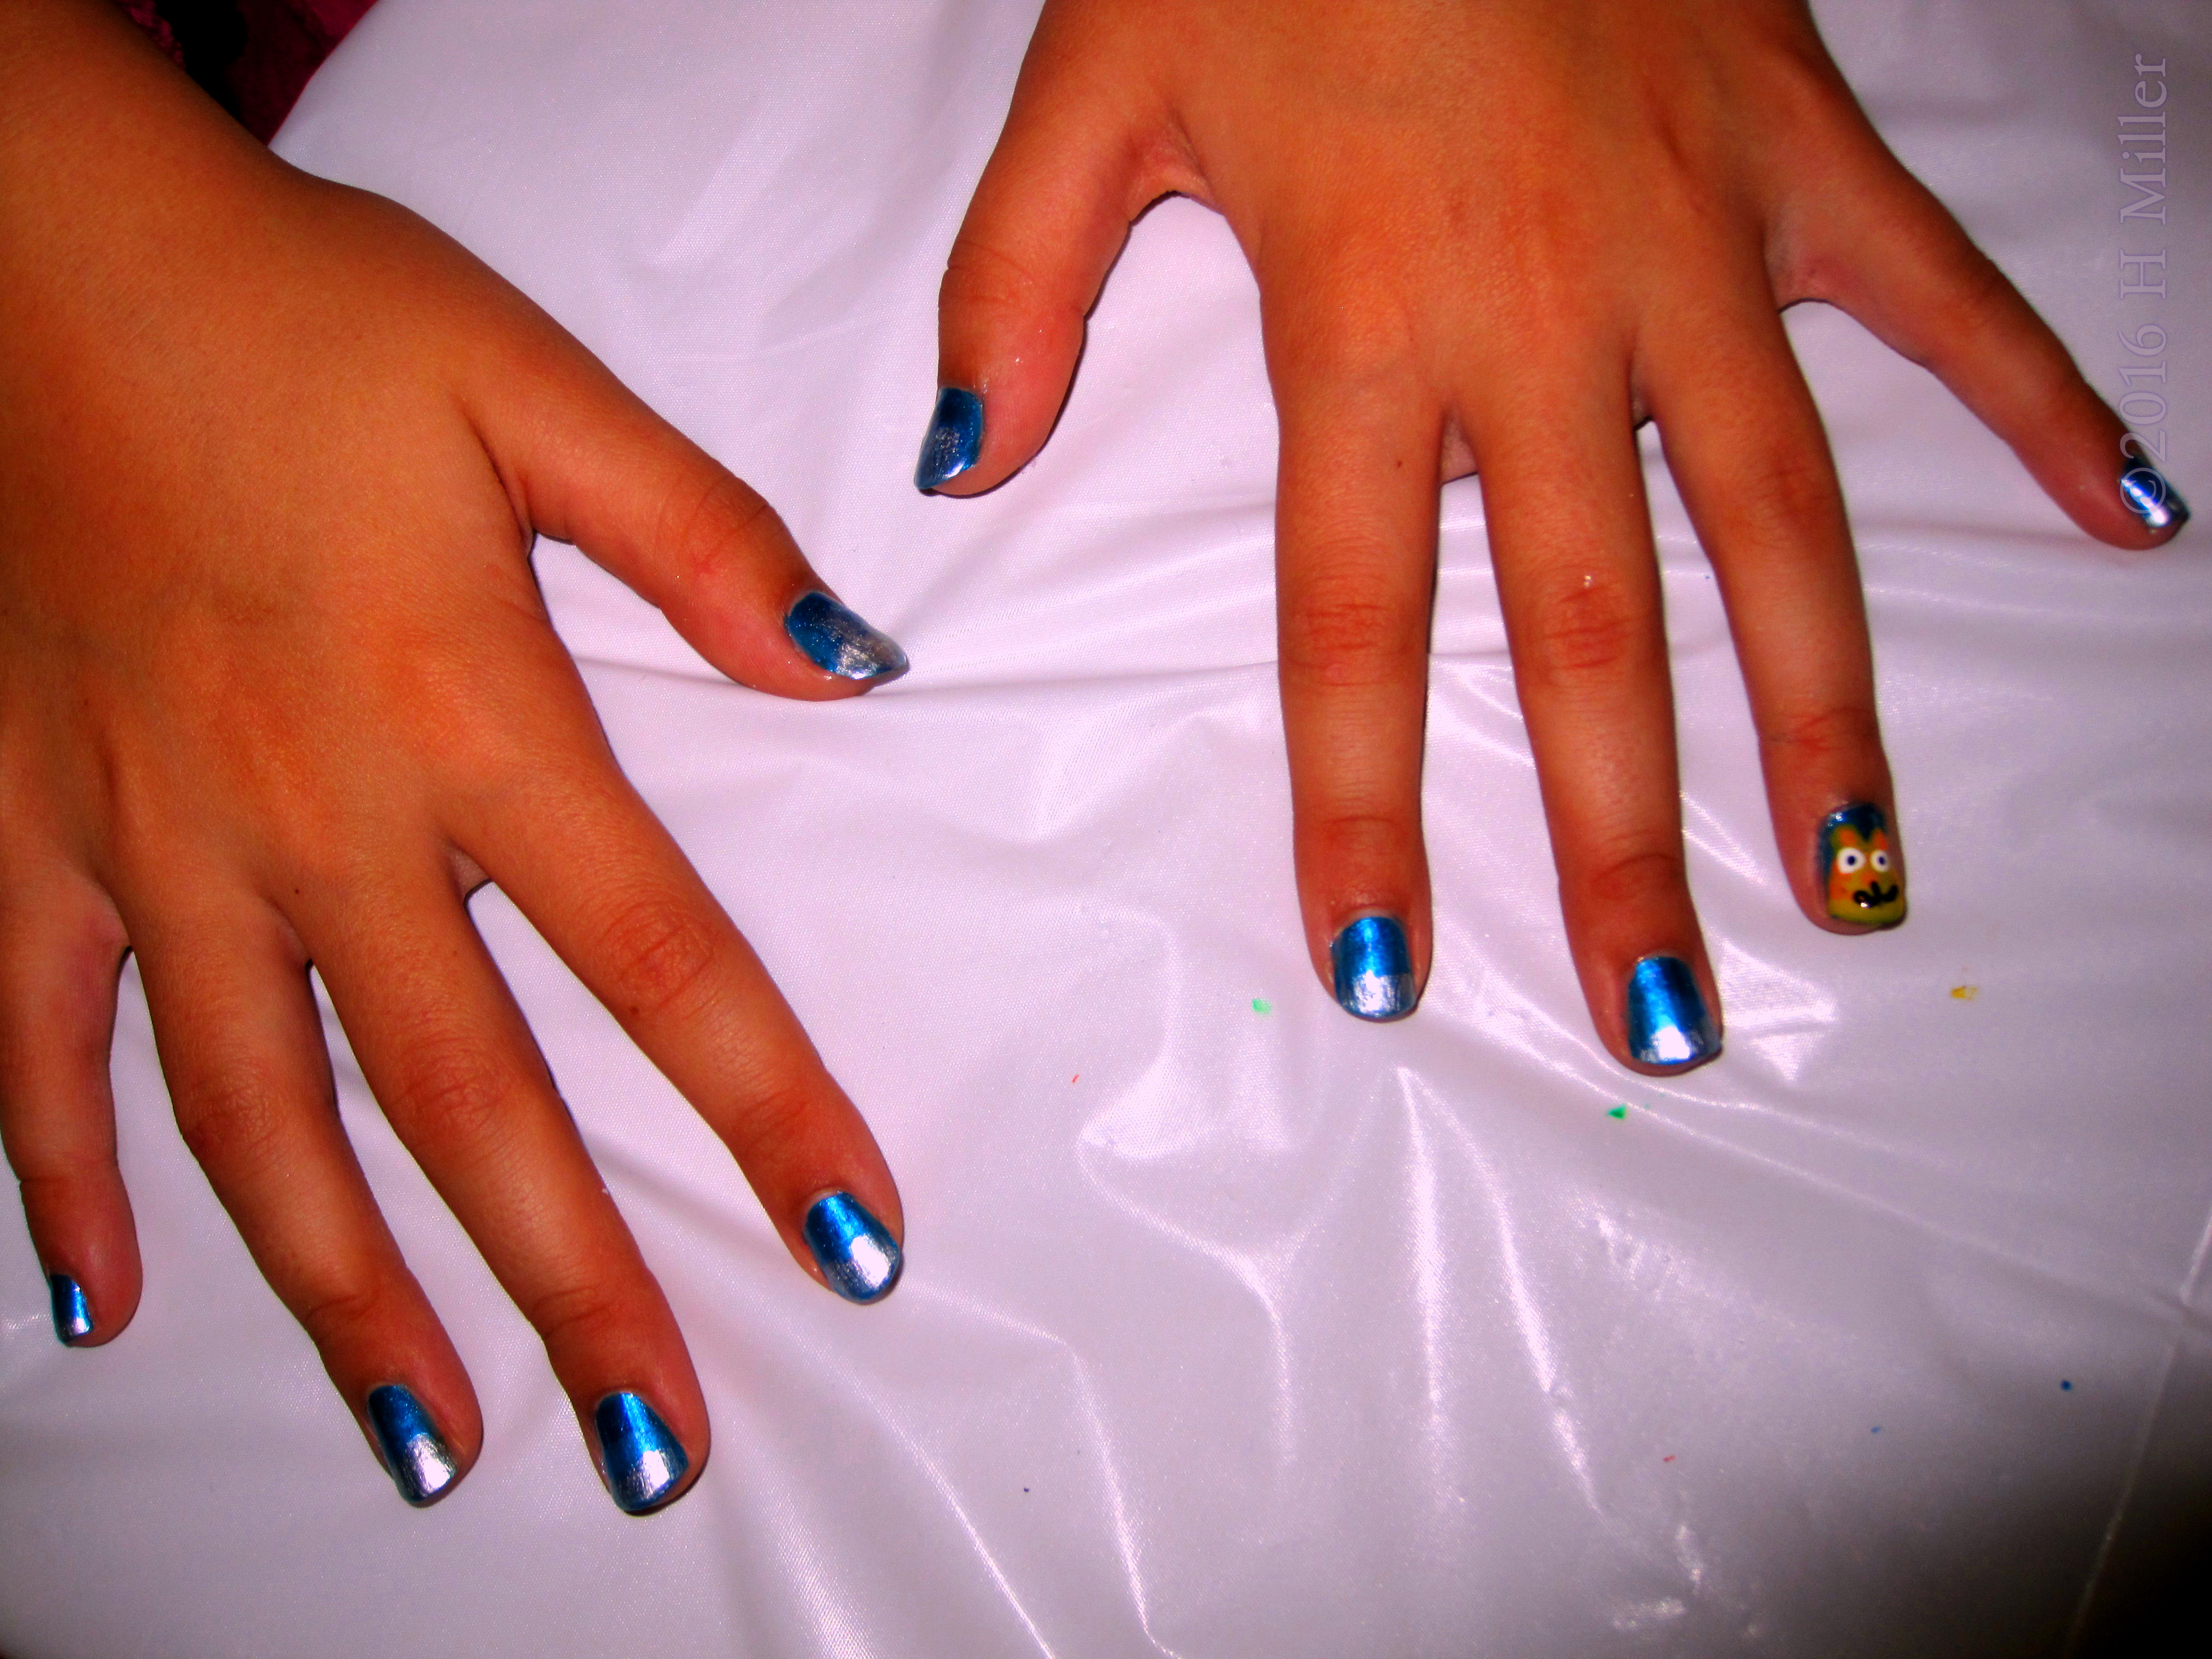 Awesome Colors And Nail Art For This Girls Mani! 